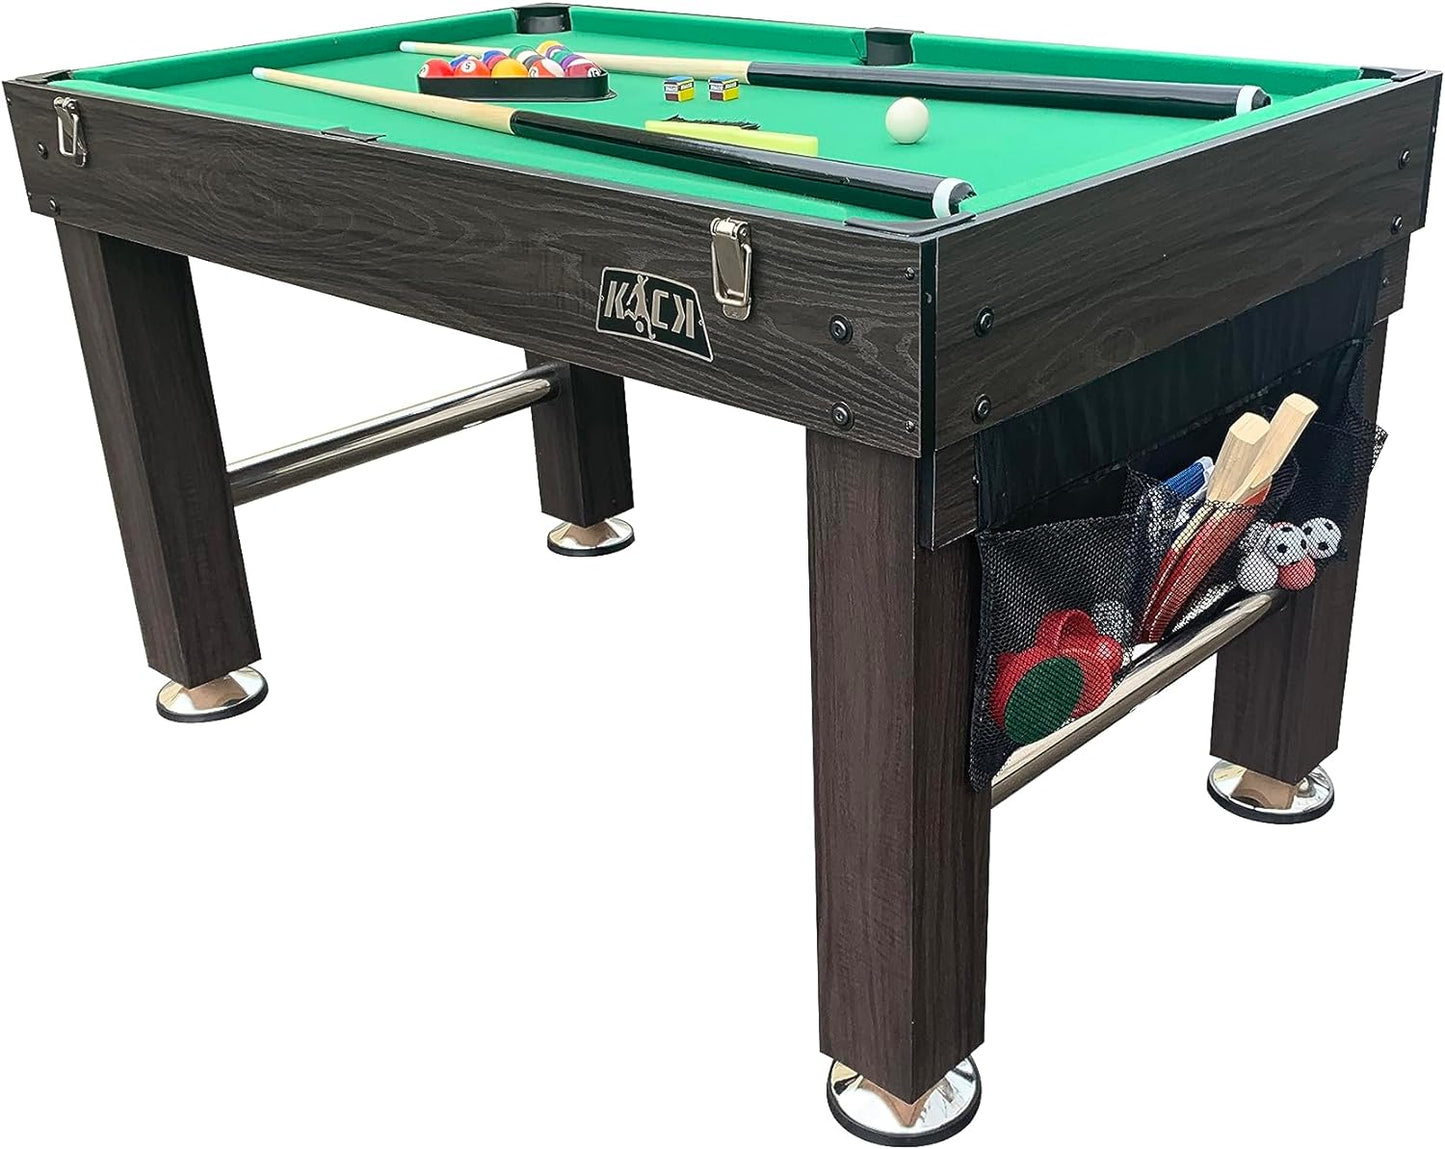 Morpheus 55″ 5 in 1 Multi-Game Table - Combo Game Table Set - Foosball, Billiards/Pool, Glide Hockey, Table Tennis, and Basketball for Home, Game Room, Friends and Family!